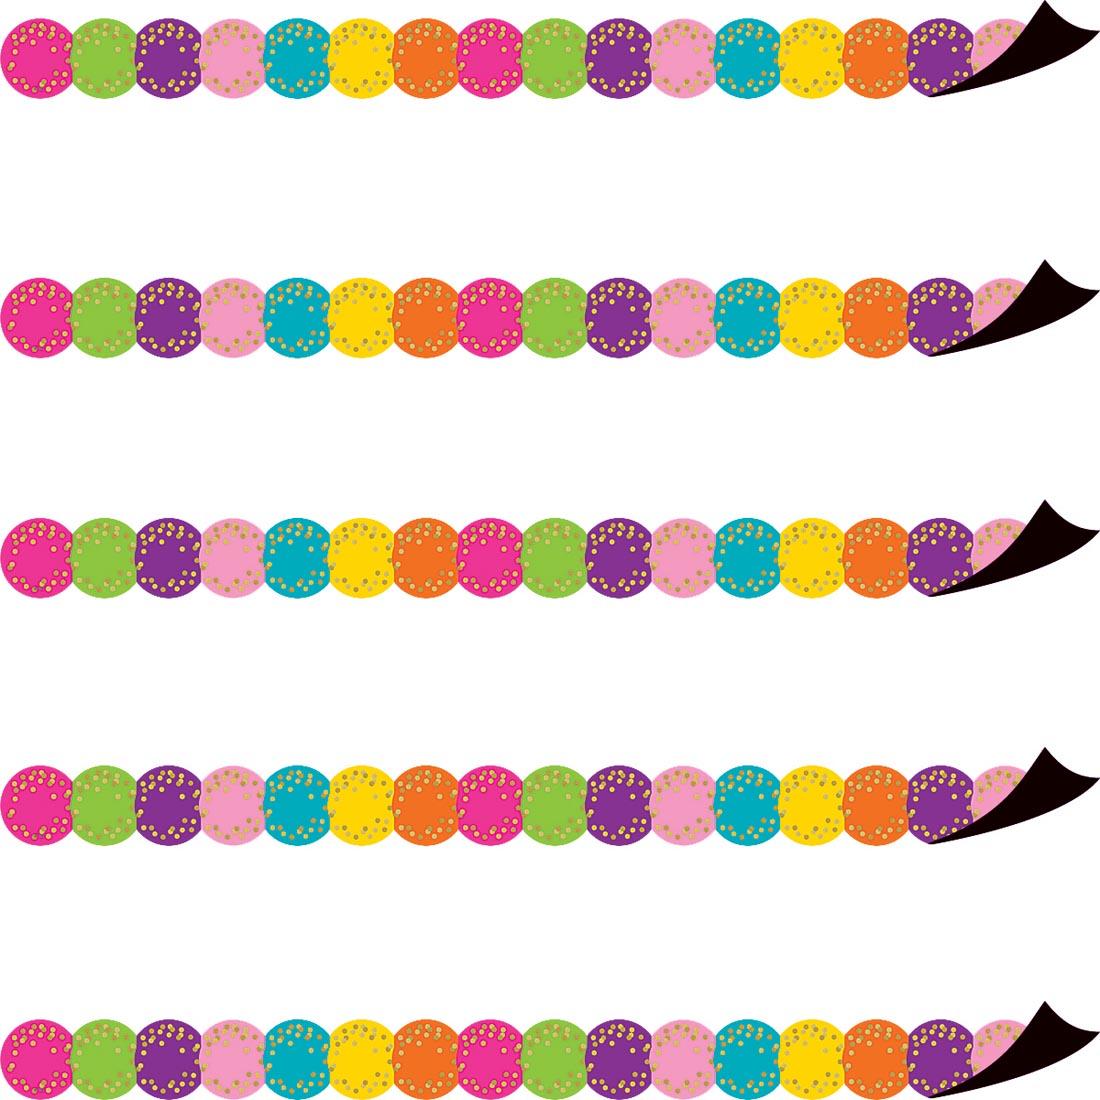 Circles Die-Cut Magnetic Border from the Confetti collection by Teacher Created Resources